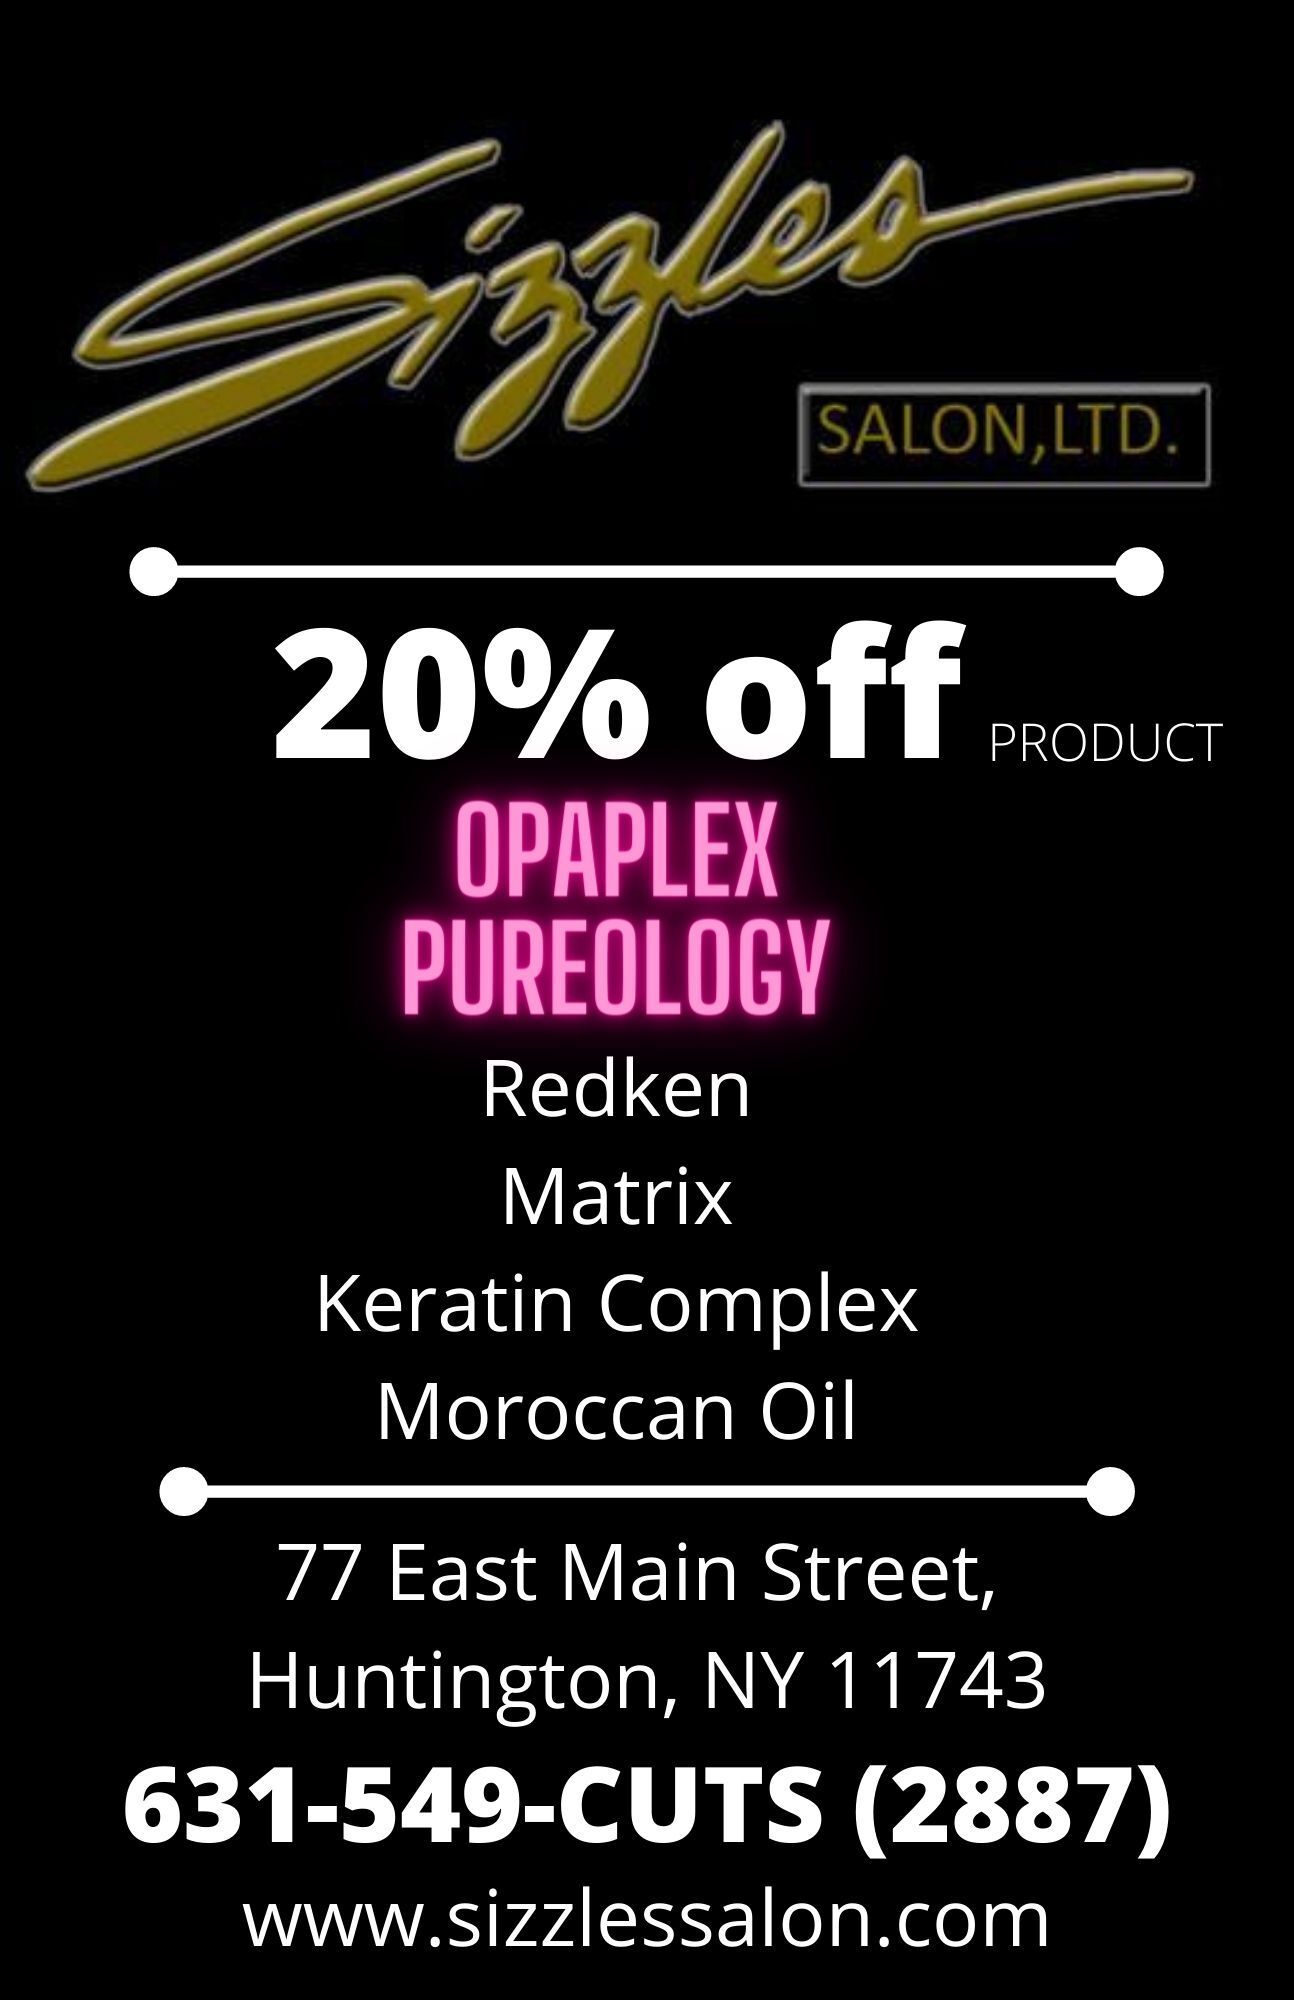 A poster for a salon that says `` 20 % off opaplex pureology ''.